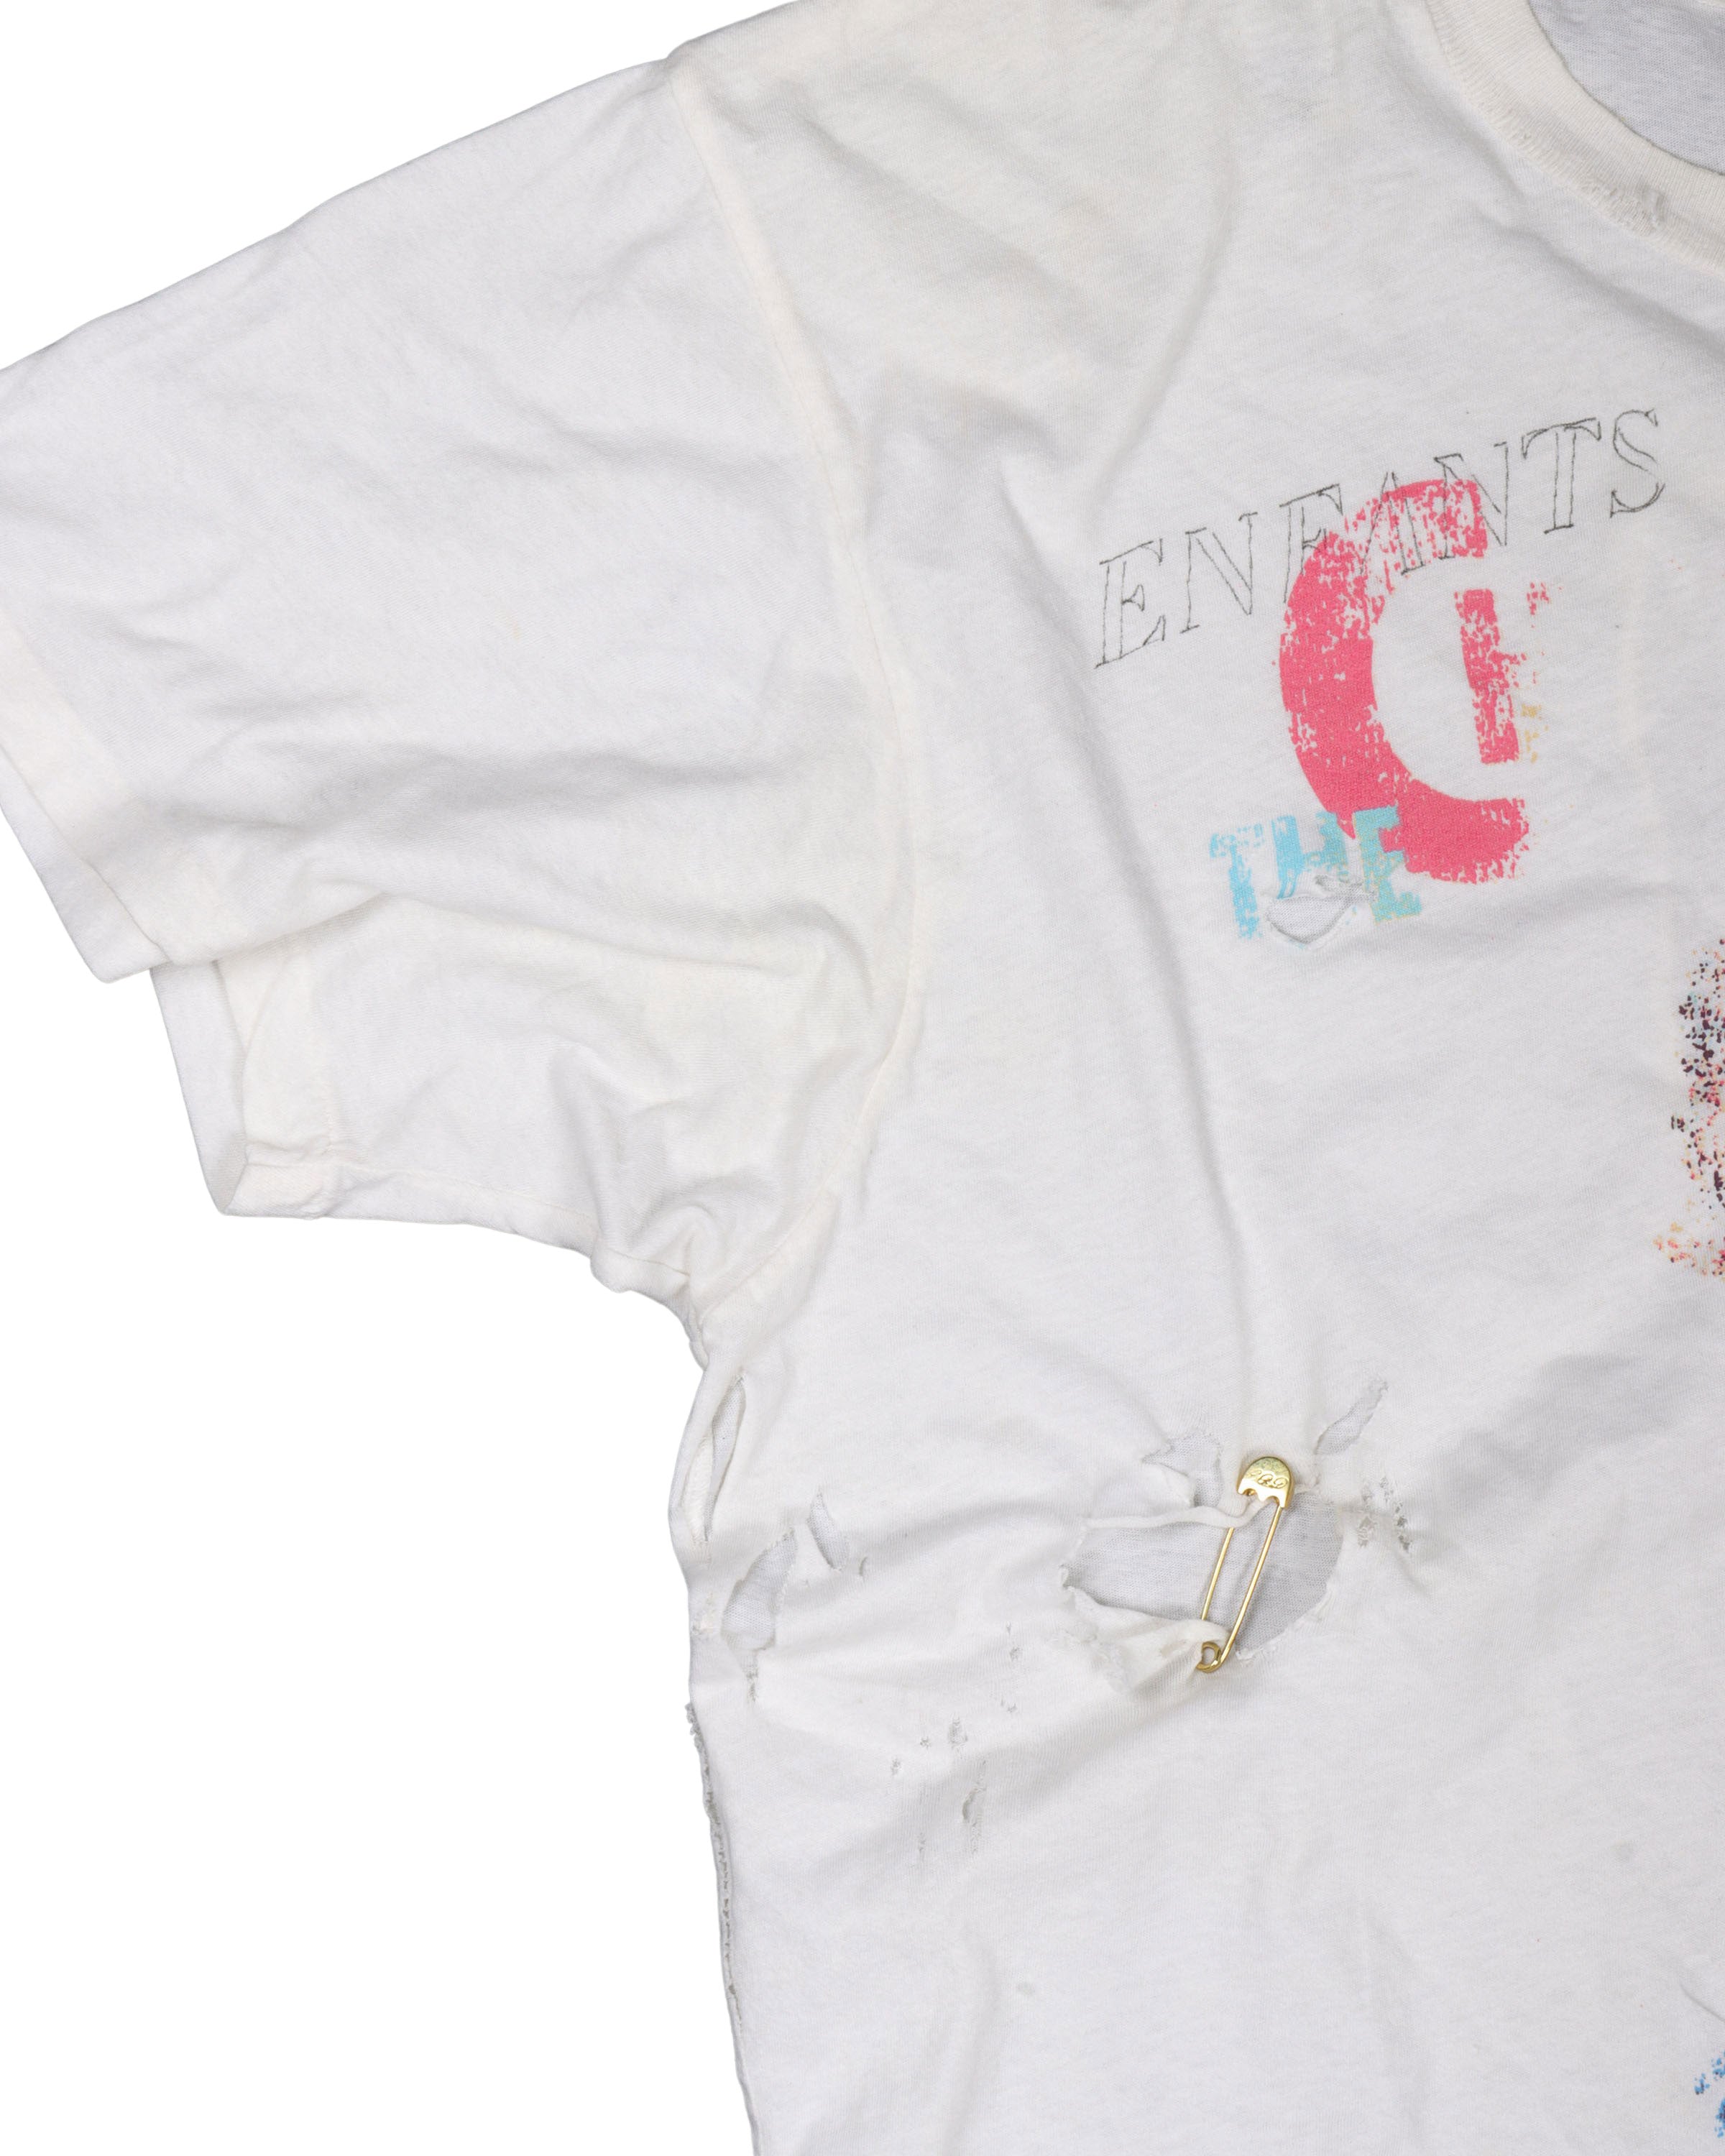 1 of 1 Henri Hand-Drawn Graphic T-Shirt w/ Gold Safety Pin